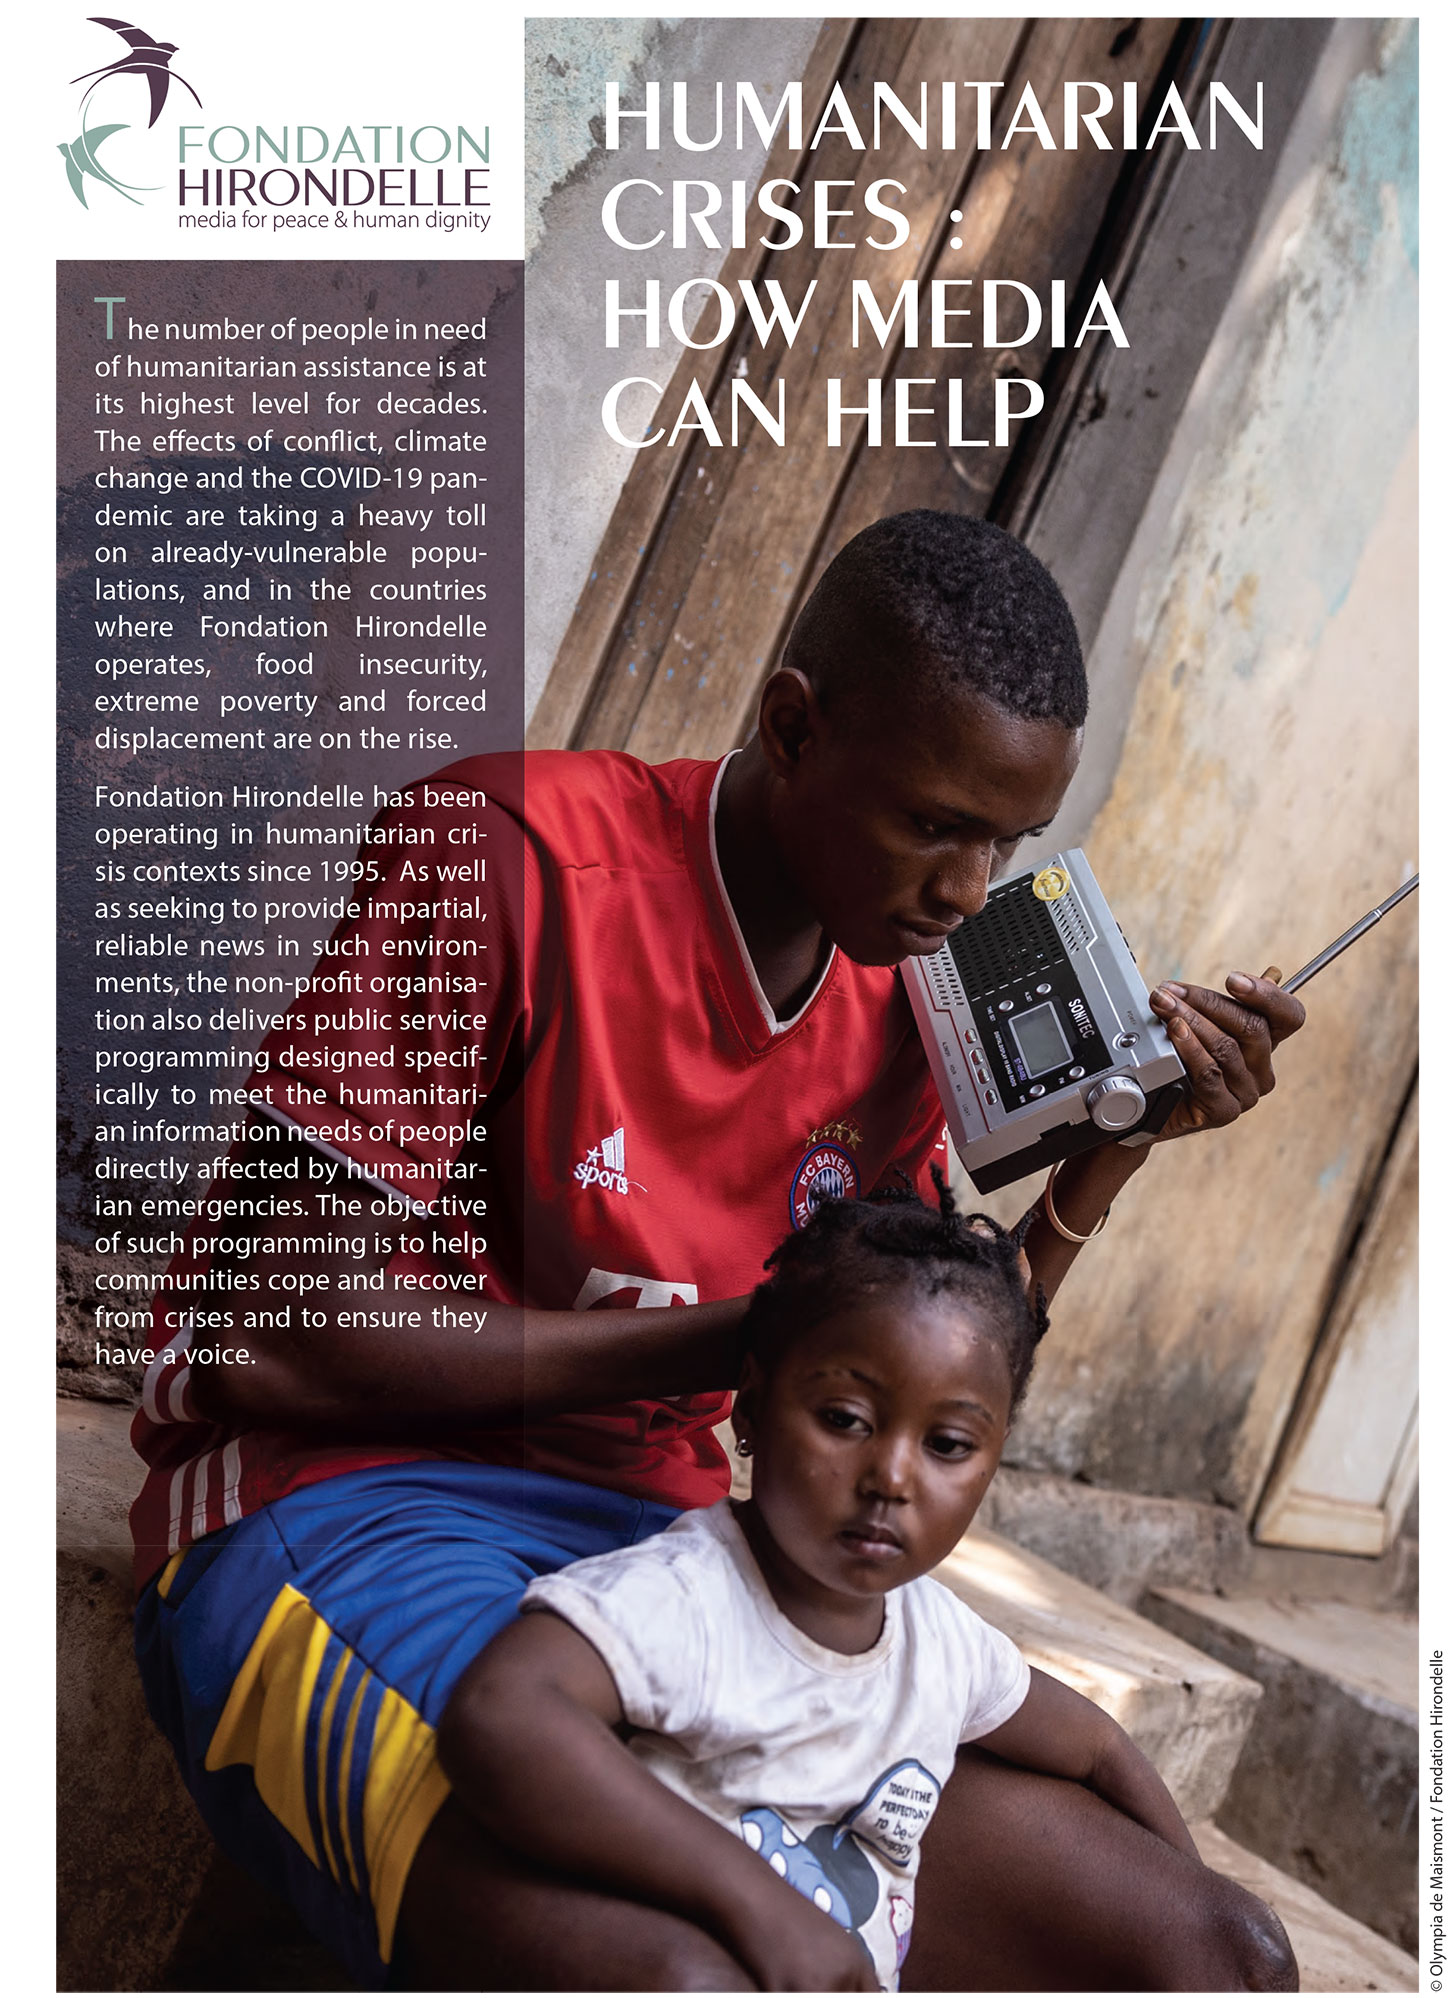 HUMANITARIAN CRISES : HOW MEDIA CAN HELP - Download our Flyer